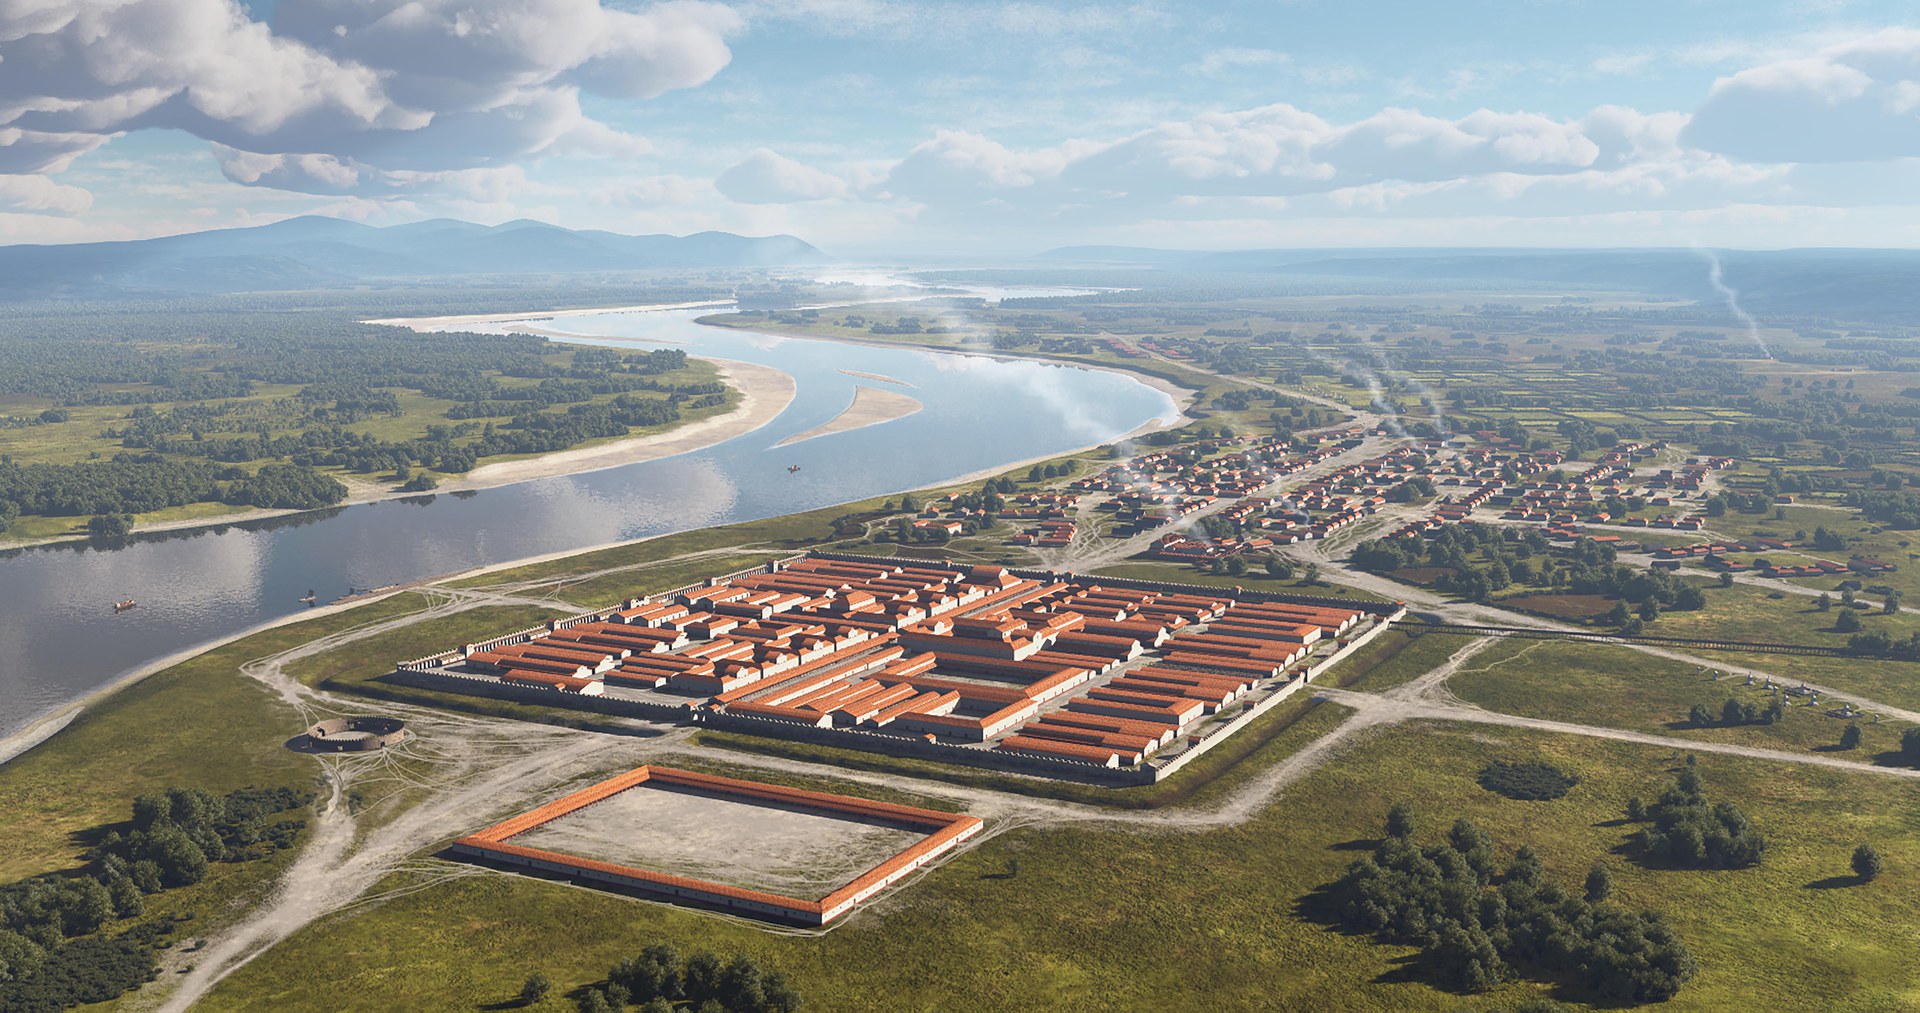 Idealized digital illustration of the Roman legionary camp and the camp suburb of Bonn, looking south.